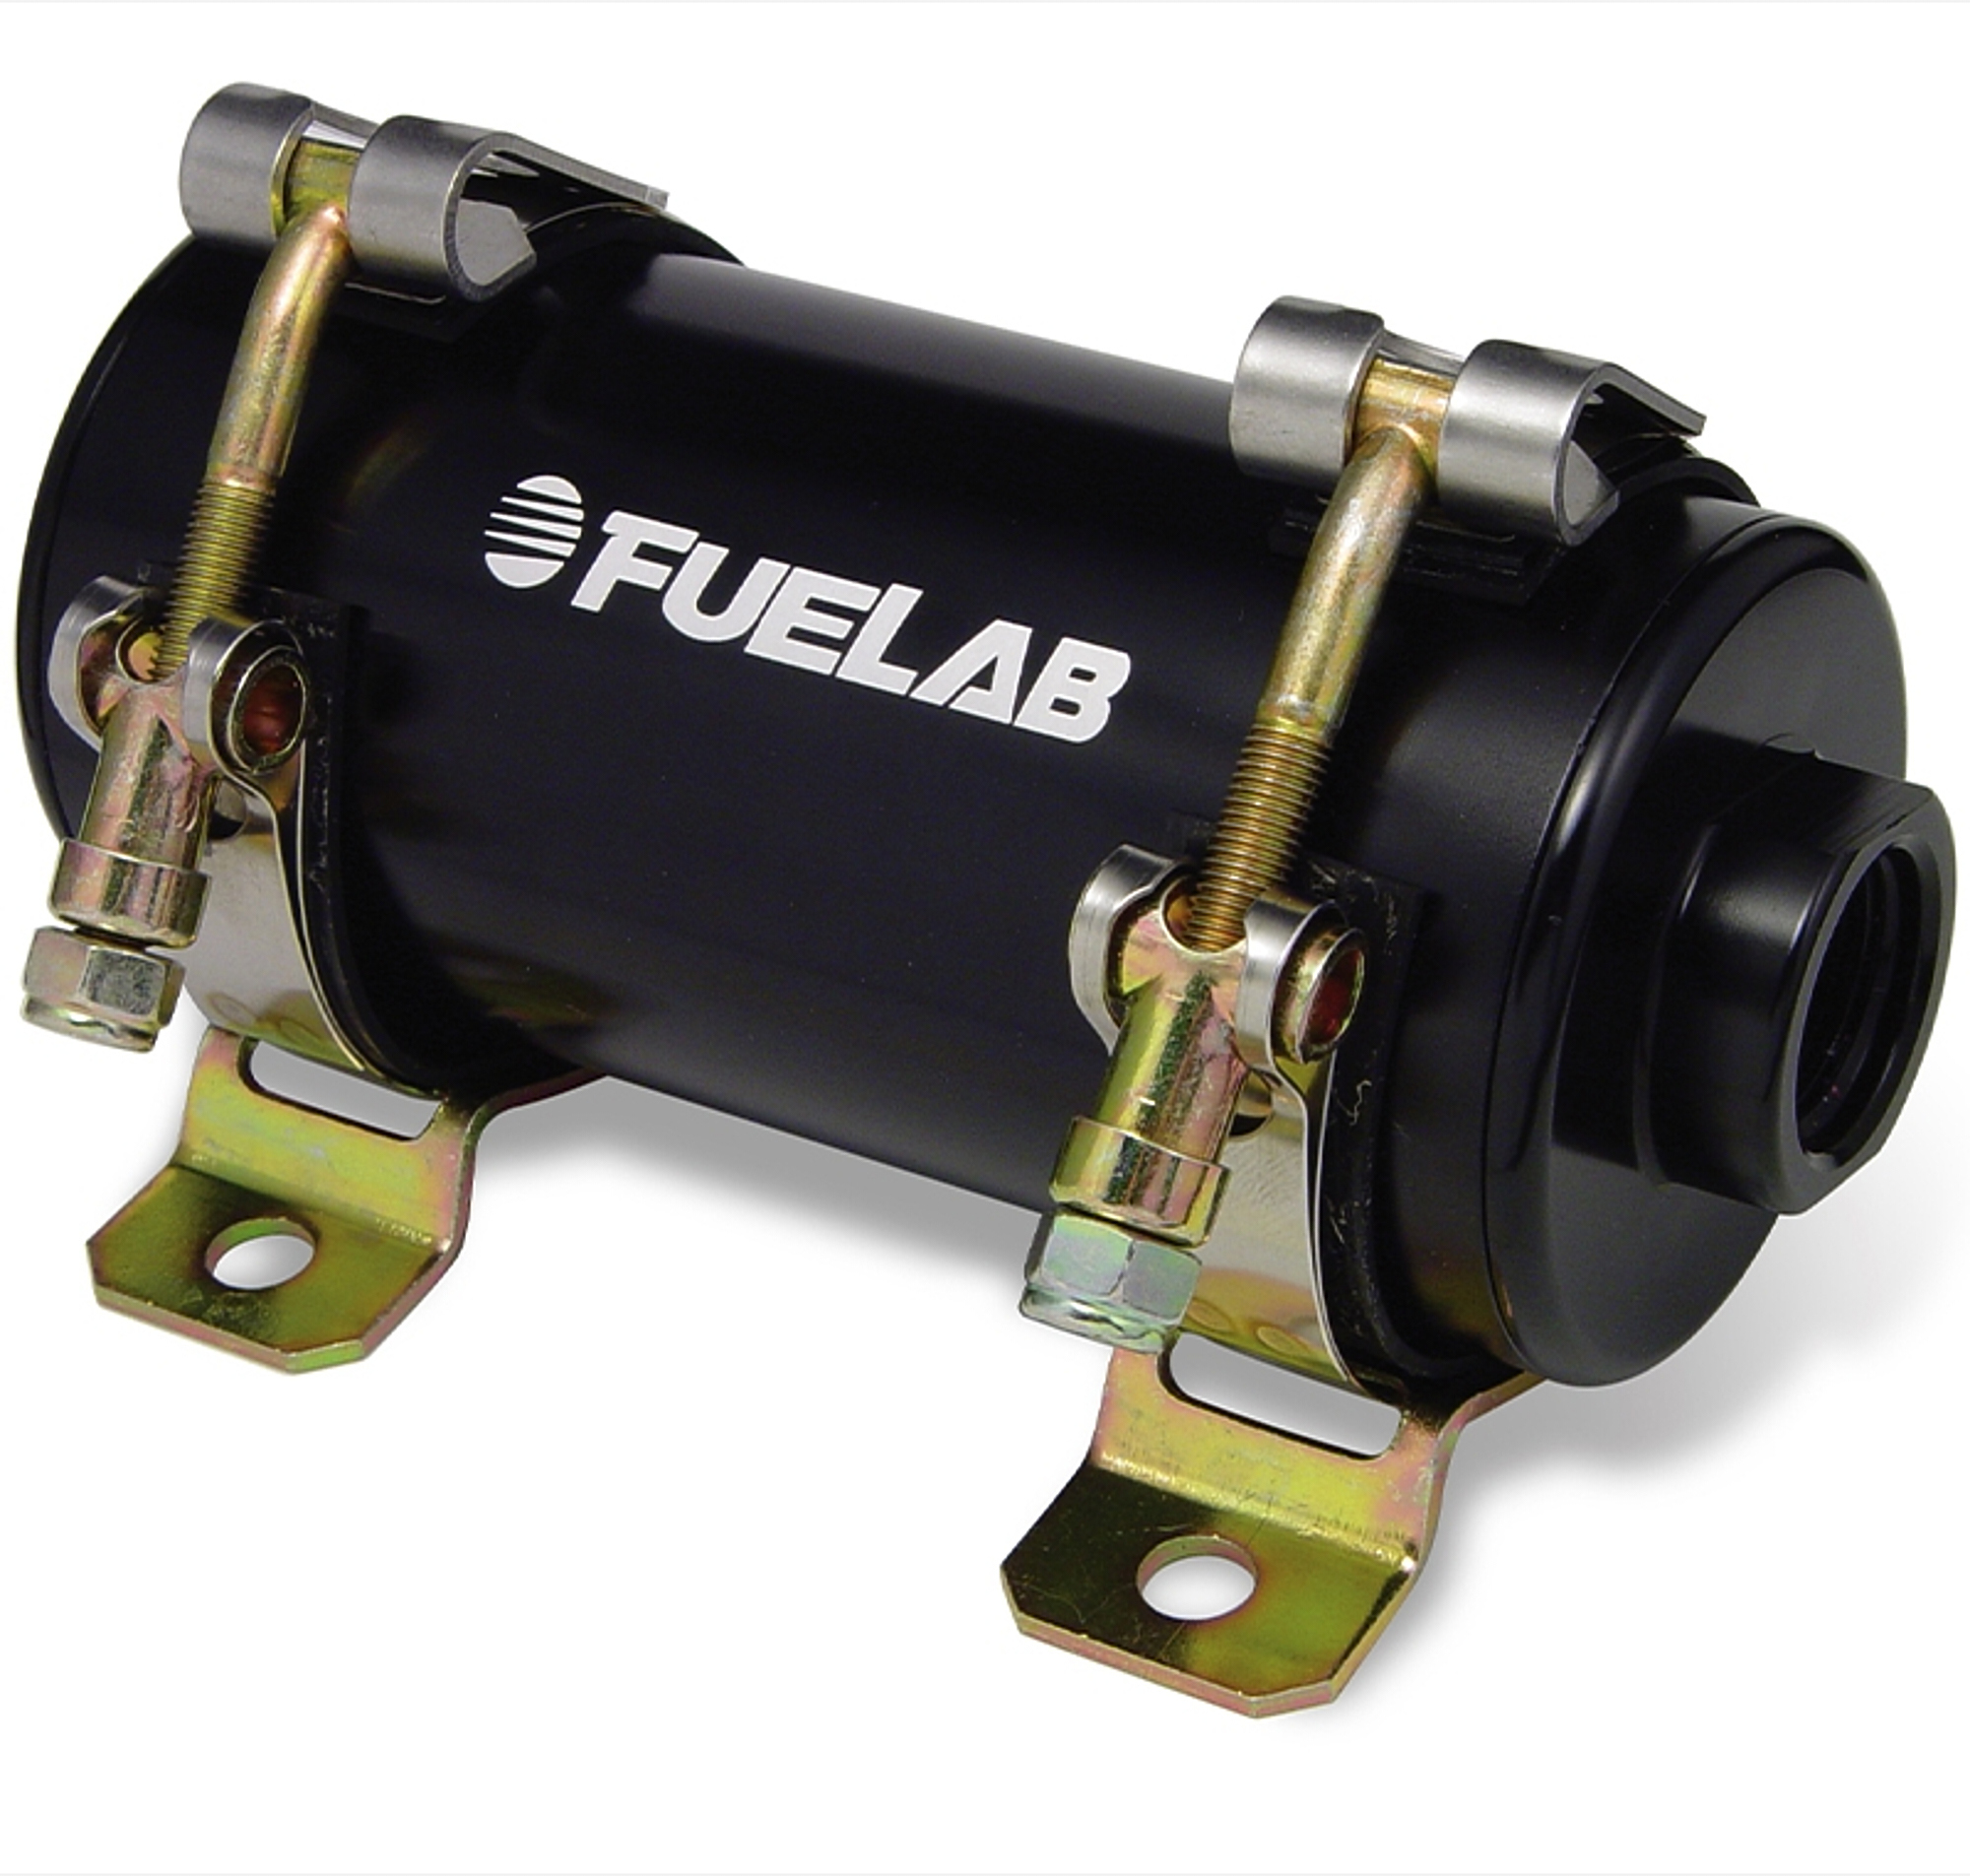 FueLab 41401-1 Fuel Pump, Electric, Inline, Brushless, 105 gph, 10 AN Female Inlet / 10 AN Female Outlet, Gas / Diesel / E85 / Methanol, Mounting Hardware Included, Aluminum, Black Anodized, Each